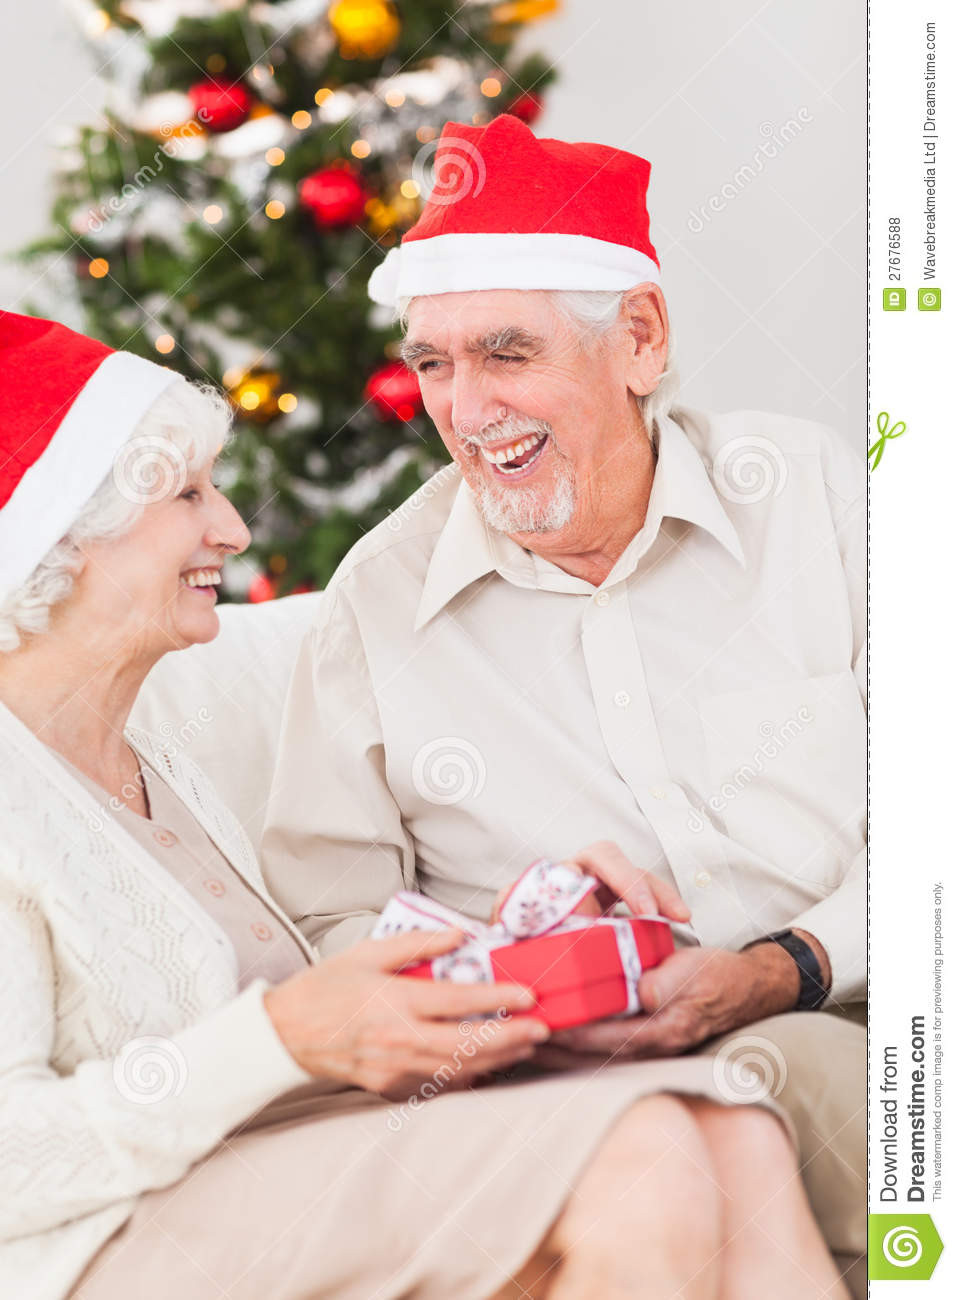 Christmas Gift Ideas For Older Couple
 Elderly Couple Exchanging Christmas Gifts Royalty Free